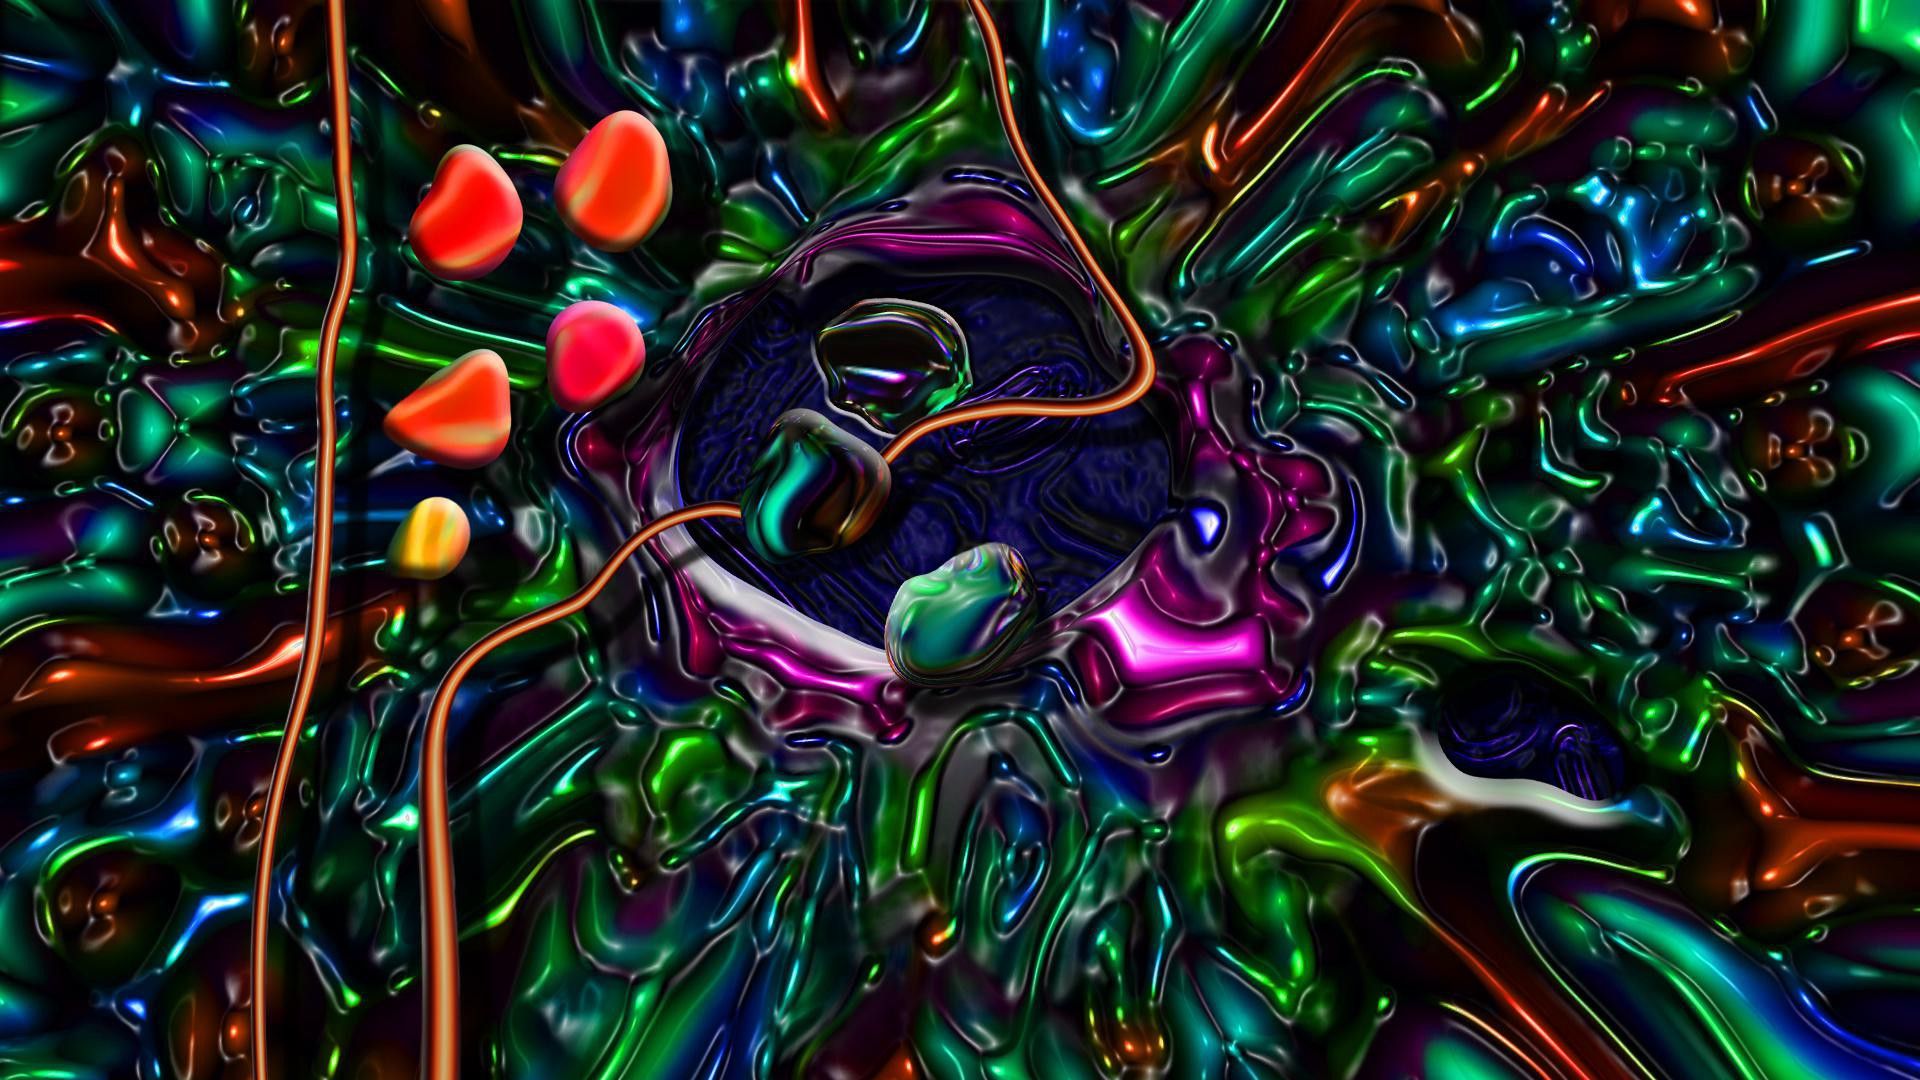 Cool Trippy Wallpapers for PC 